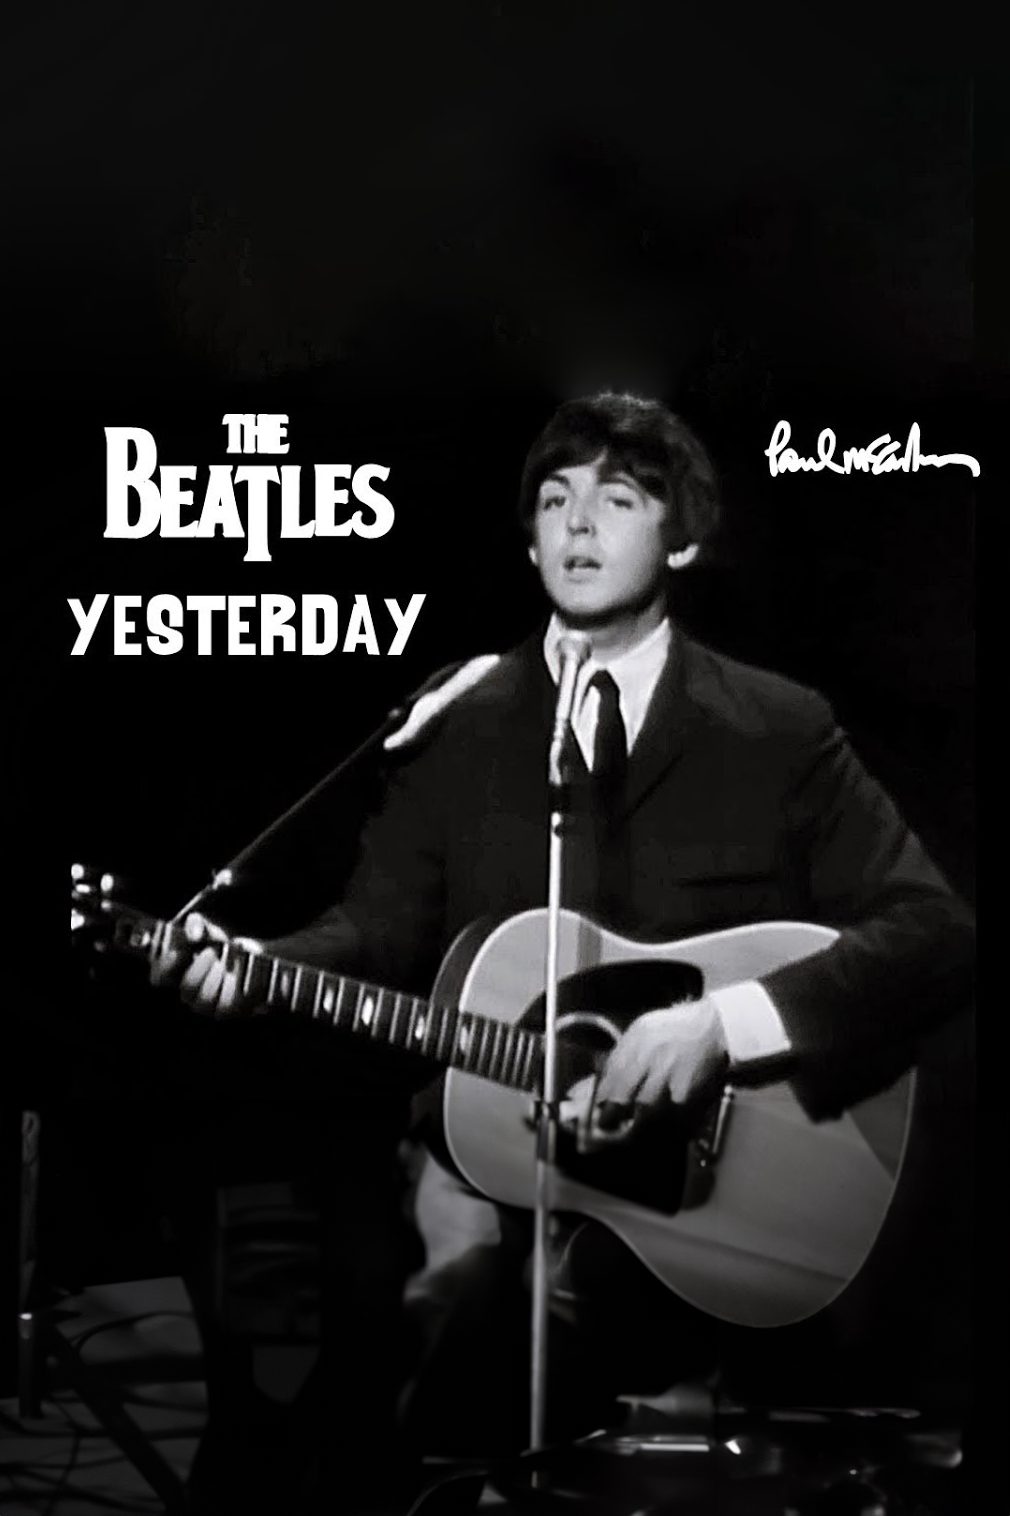 A photograph of Paul McCartney performing Yesterday, a caption of his autograph and the The Beatles logo are overlaid on the image.